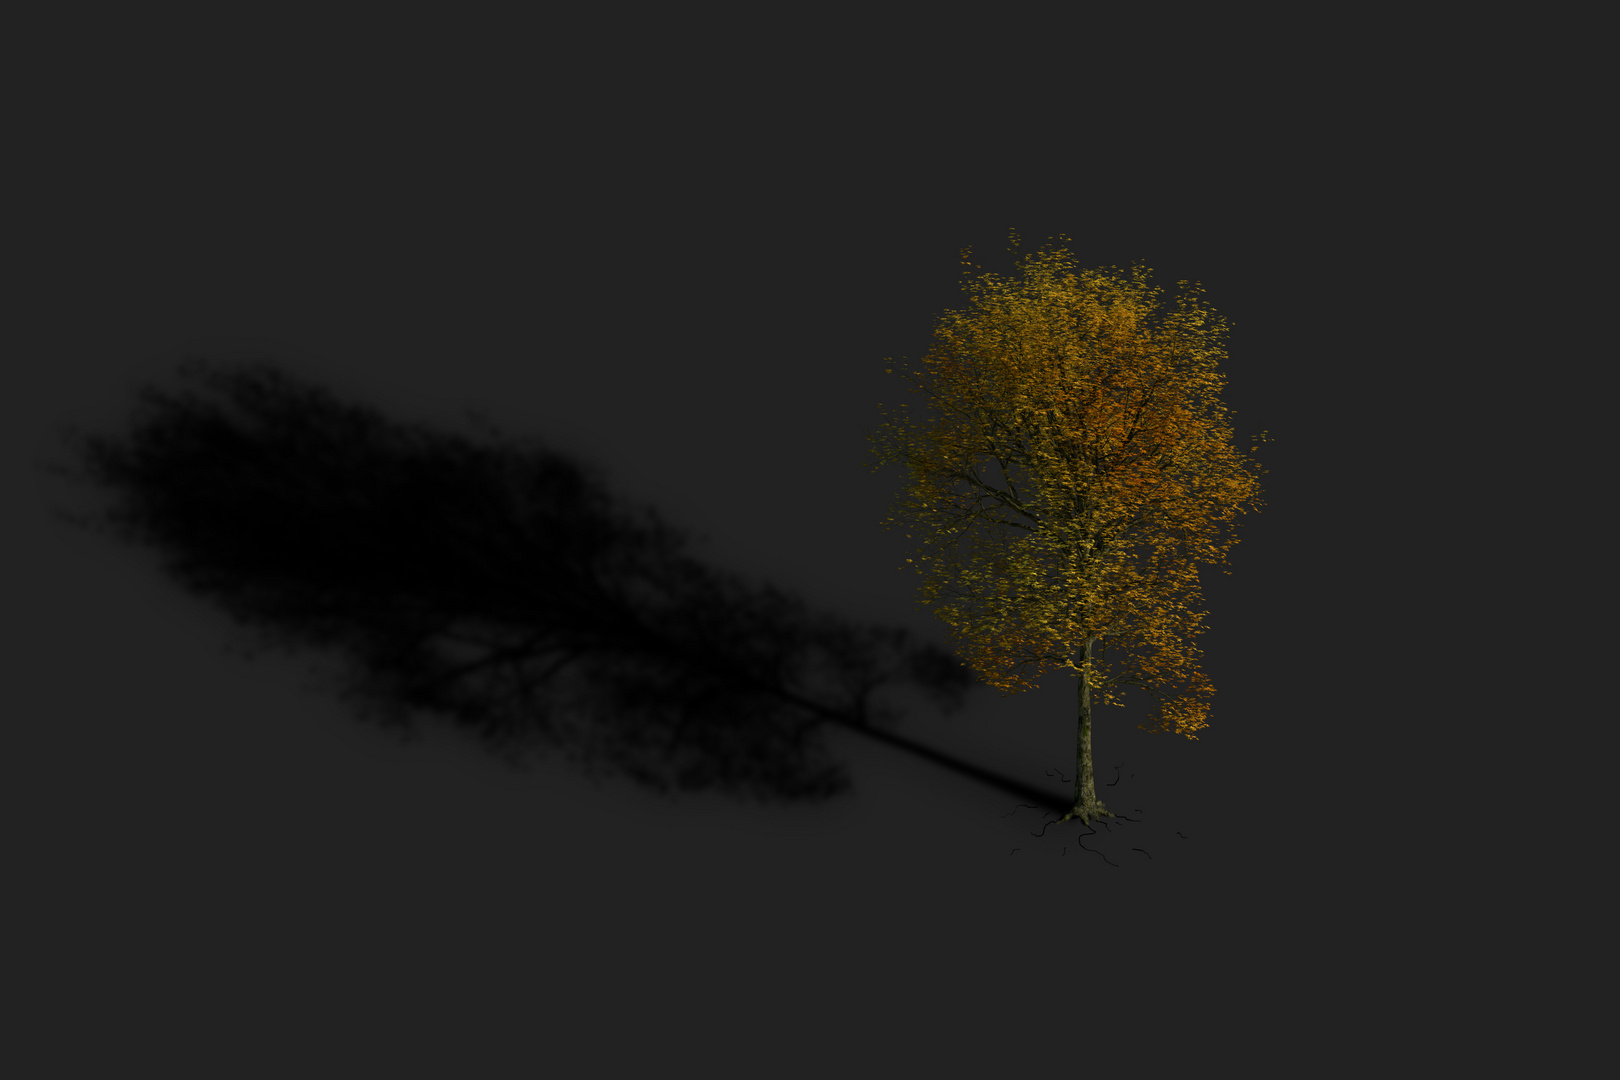 just a tree in fotocommunity...